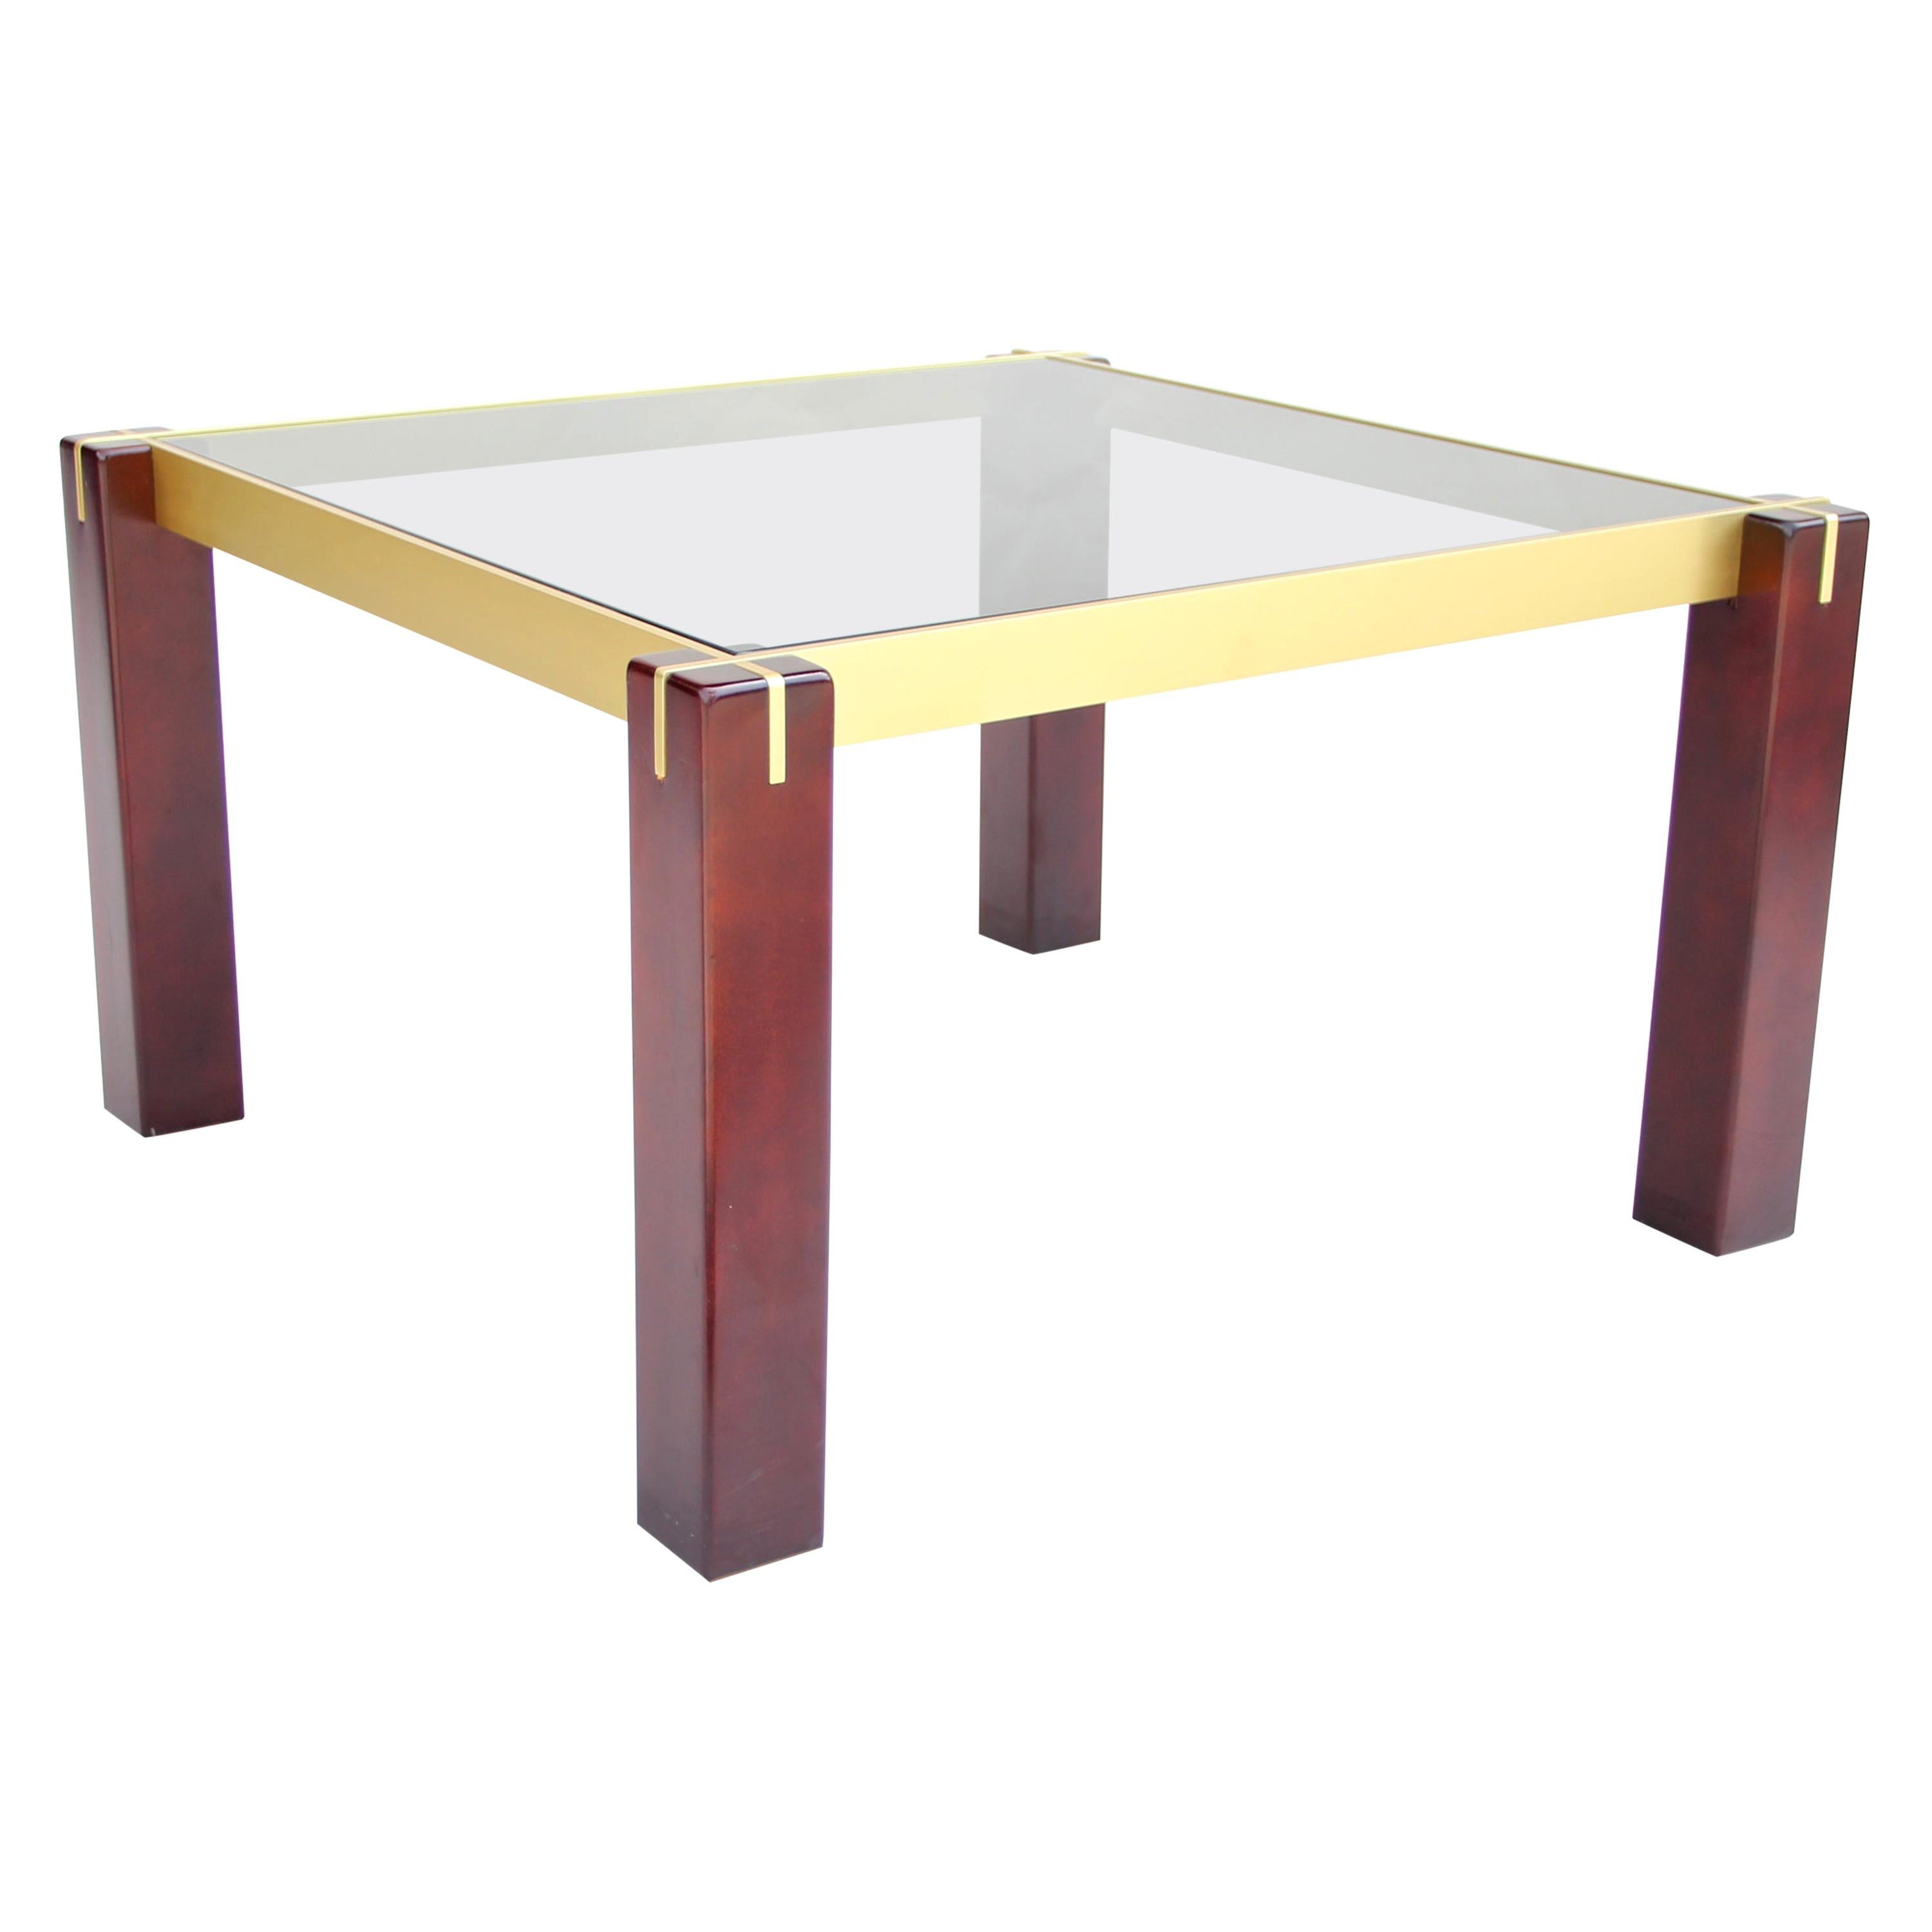 Midcentury Side Table with Brass Bars and Smoked Glass, Italy, circa 1960